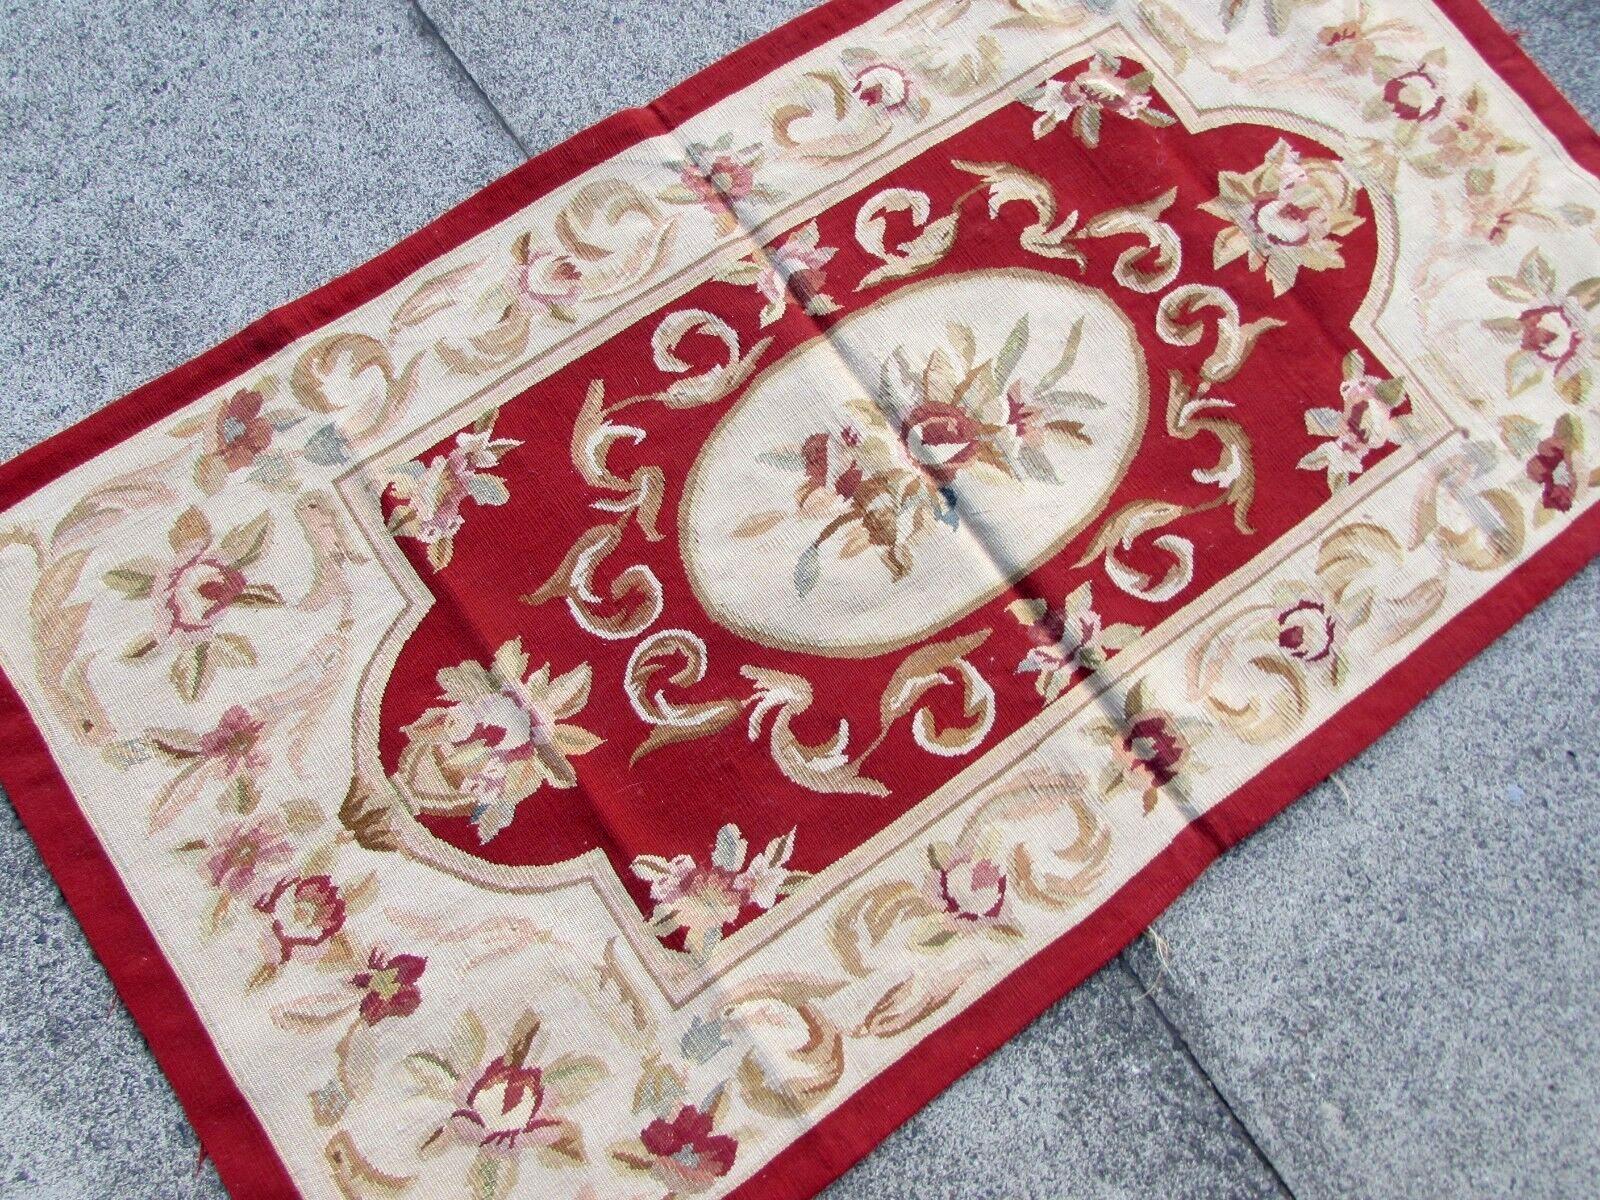 Add a touch of vintage elegance to your home decor with this exquisite handmade French Aubusson wool rug. Crafted in the Aubusson style, this high-quality rug features intricate floral and geometric patterns in beige, burgundy, brown, and